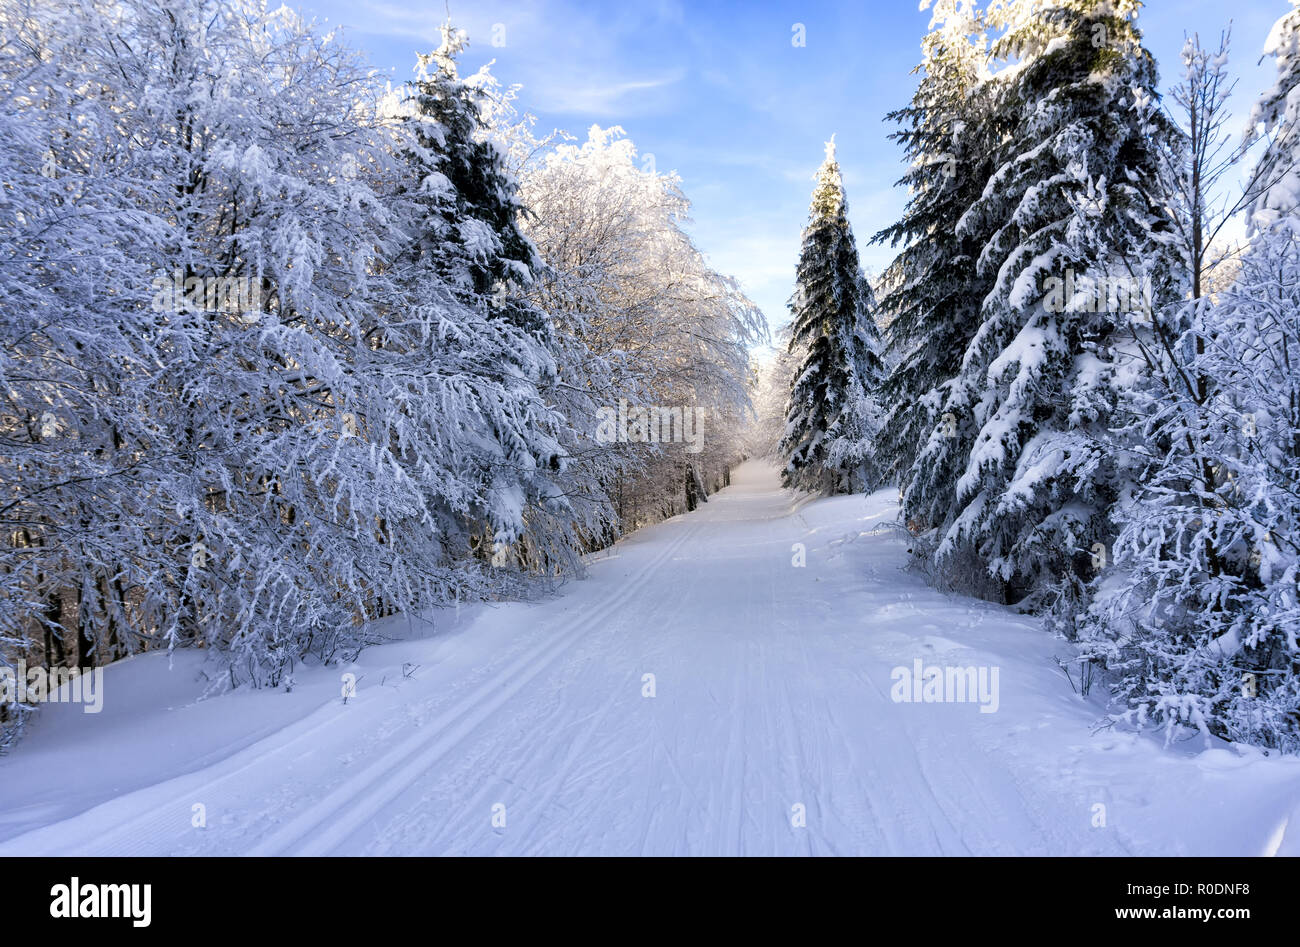 Road in the winter mountains. Trees in forest or park covered with fresh snow and illuminated by the late afternoon sun. Cross-country groomed ski tra Stock Photo